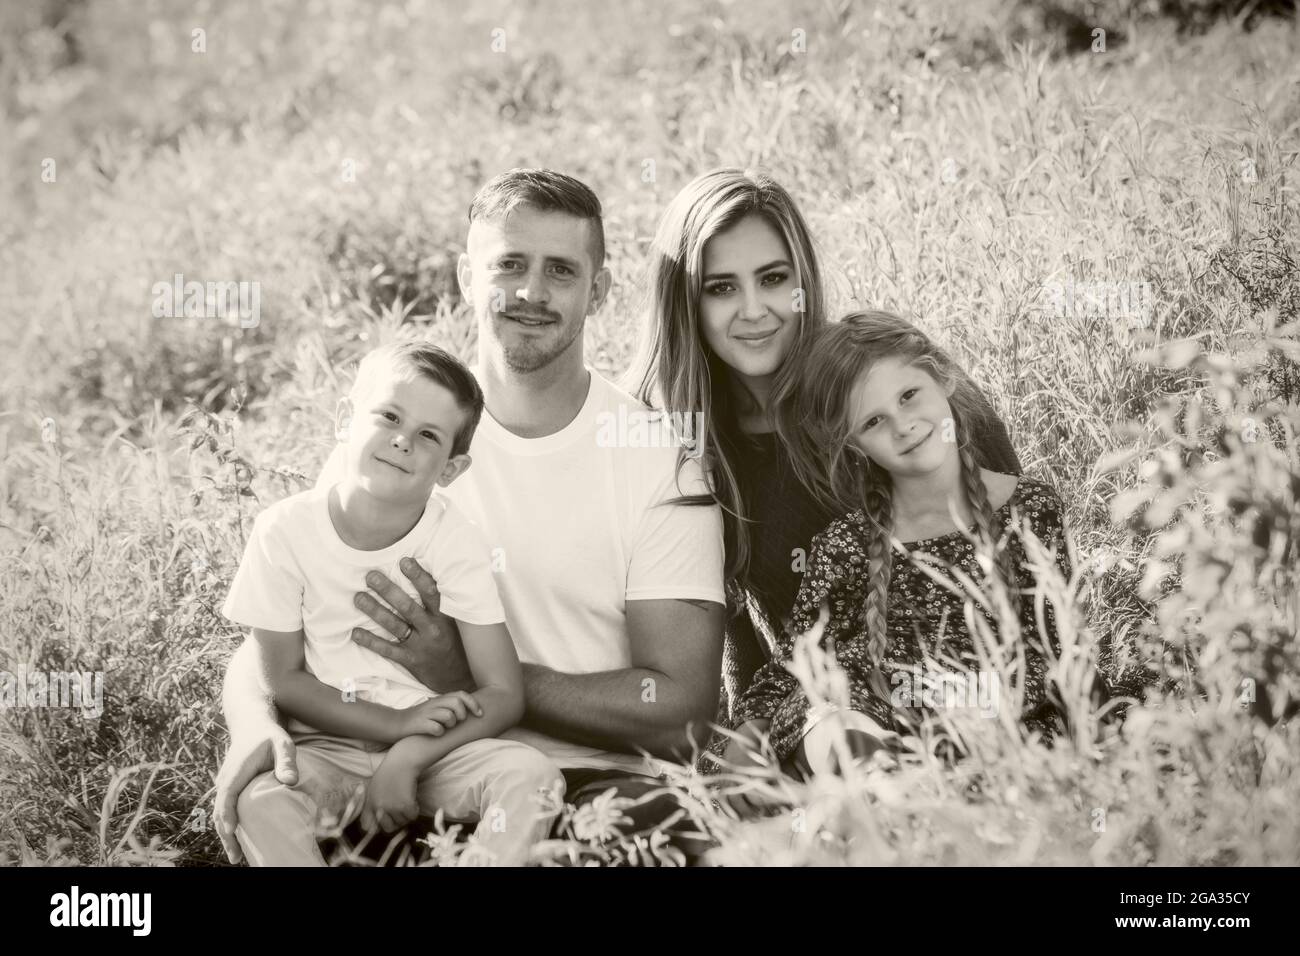 Black and white portrait of a family of four with two young children sitting on grass in a park; Edmonton, Alberta, Canada Stock Photo